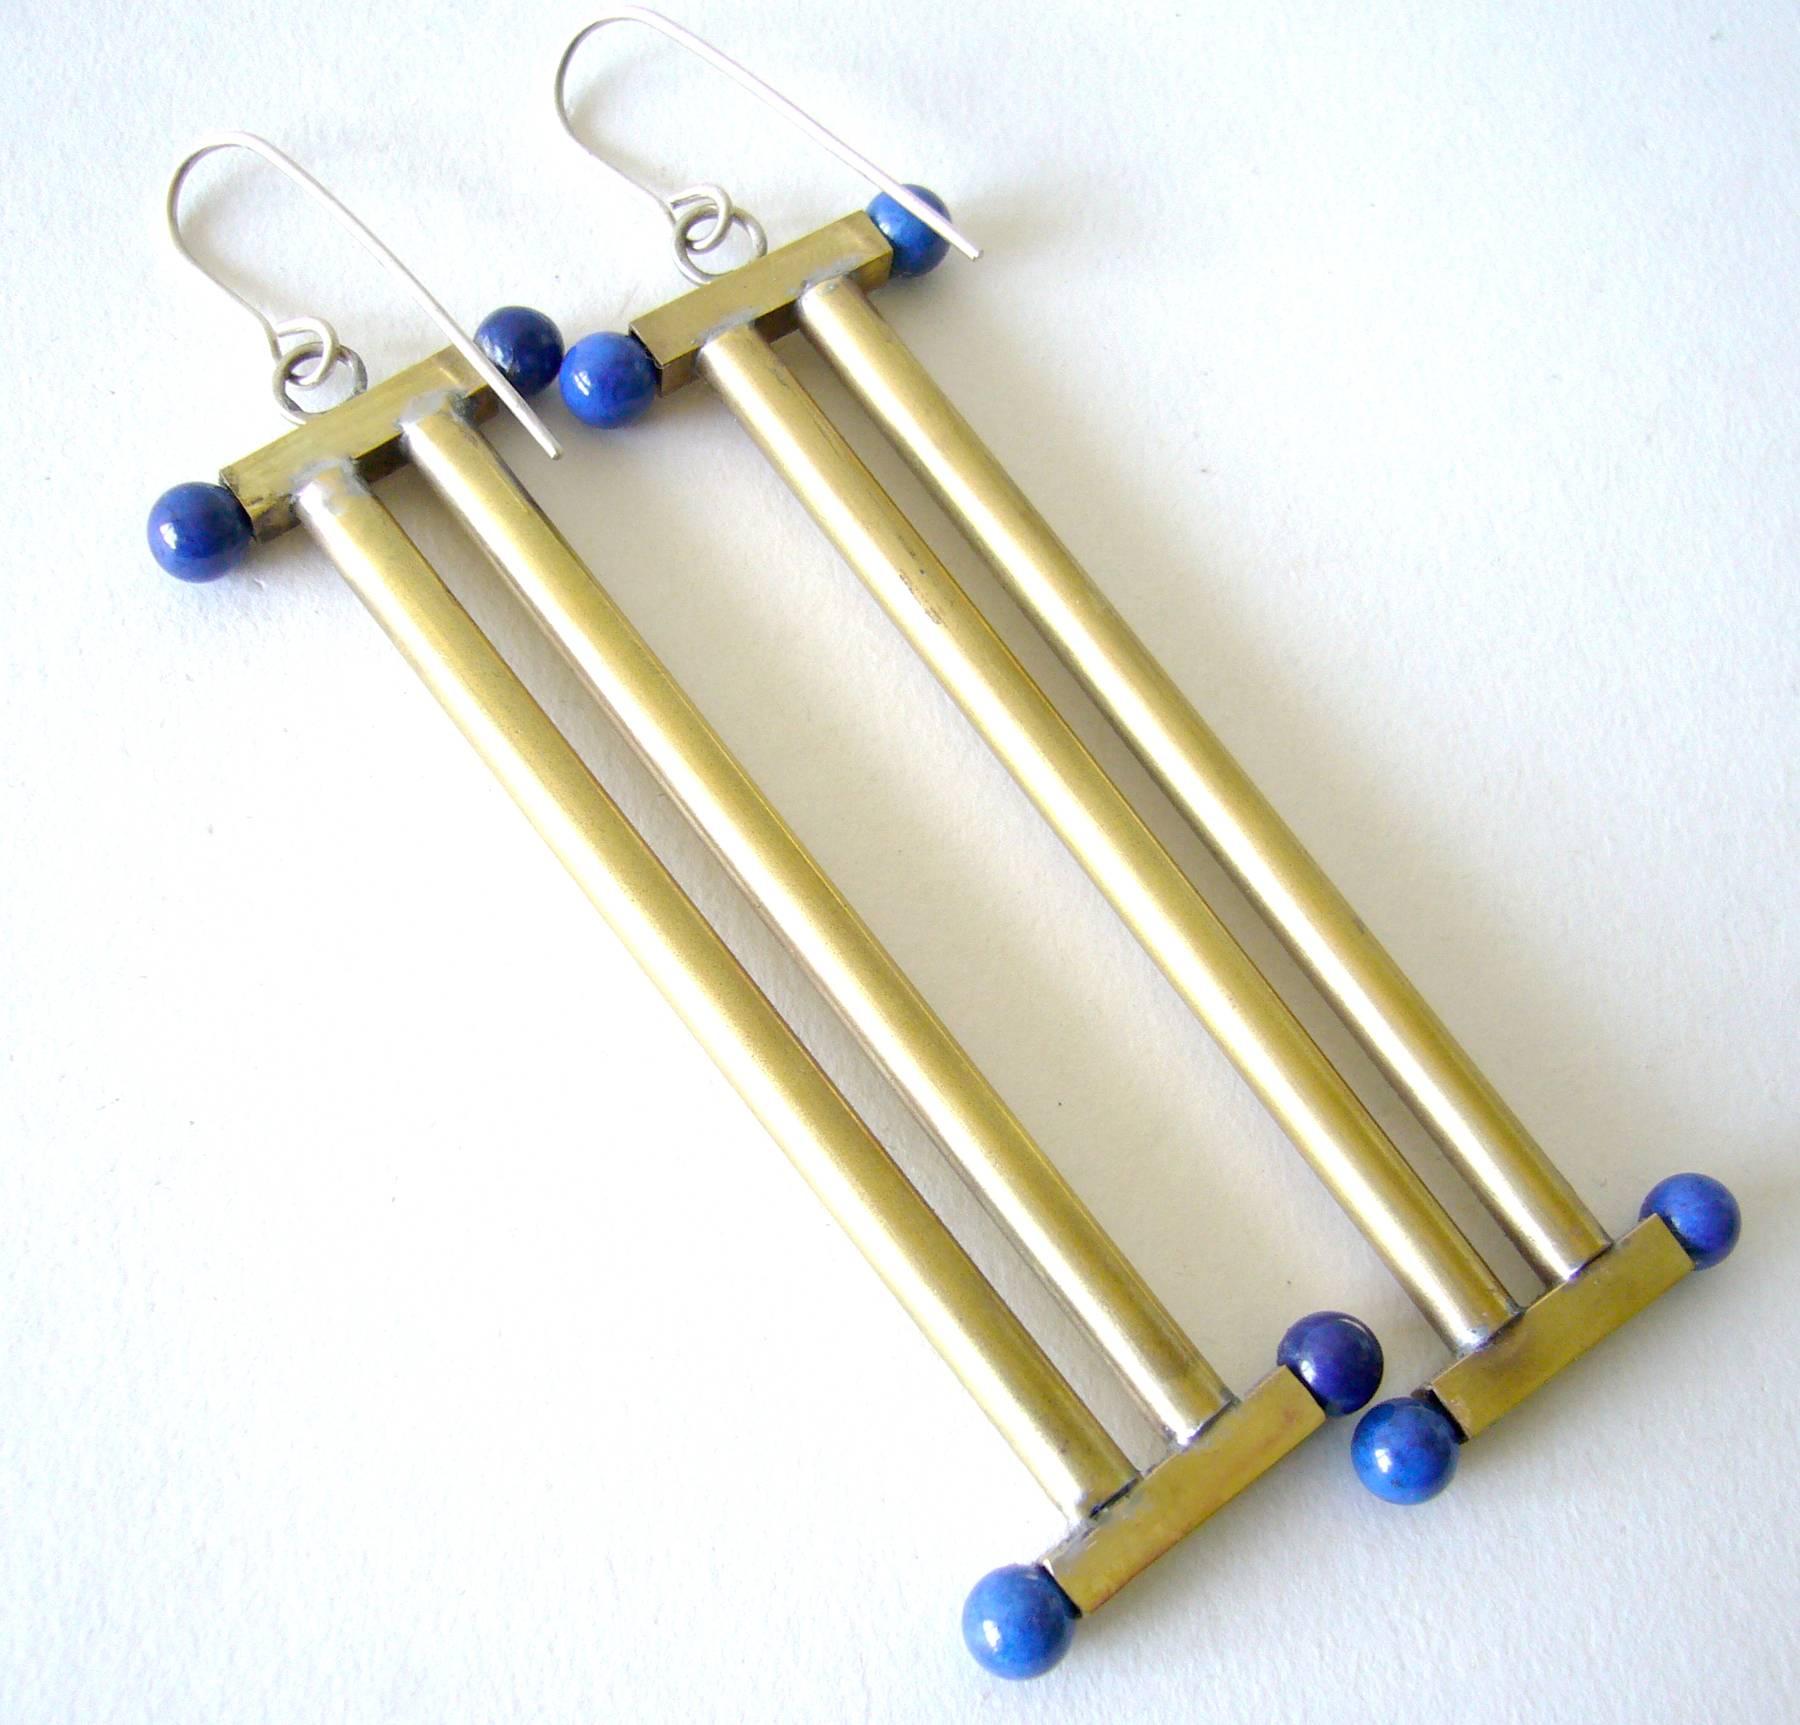 Handmade brass and lapis lazuli column earrings in the Post Modernist style designed and created by Heidi Abrahamson.  Earrings measure 3.75